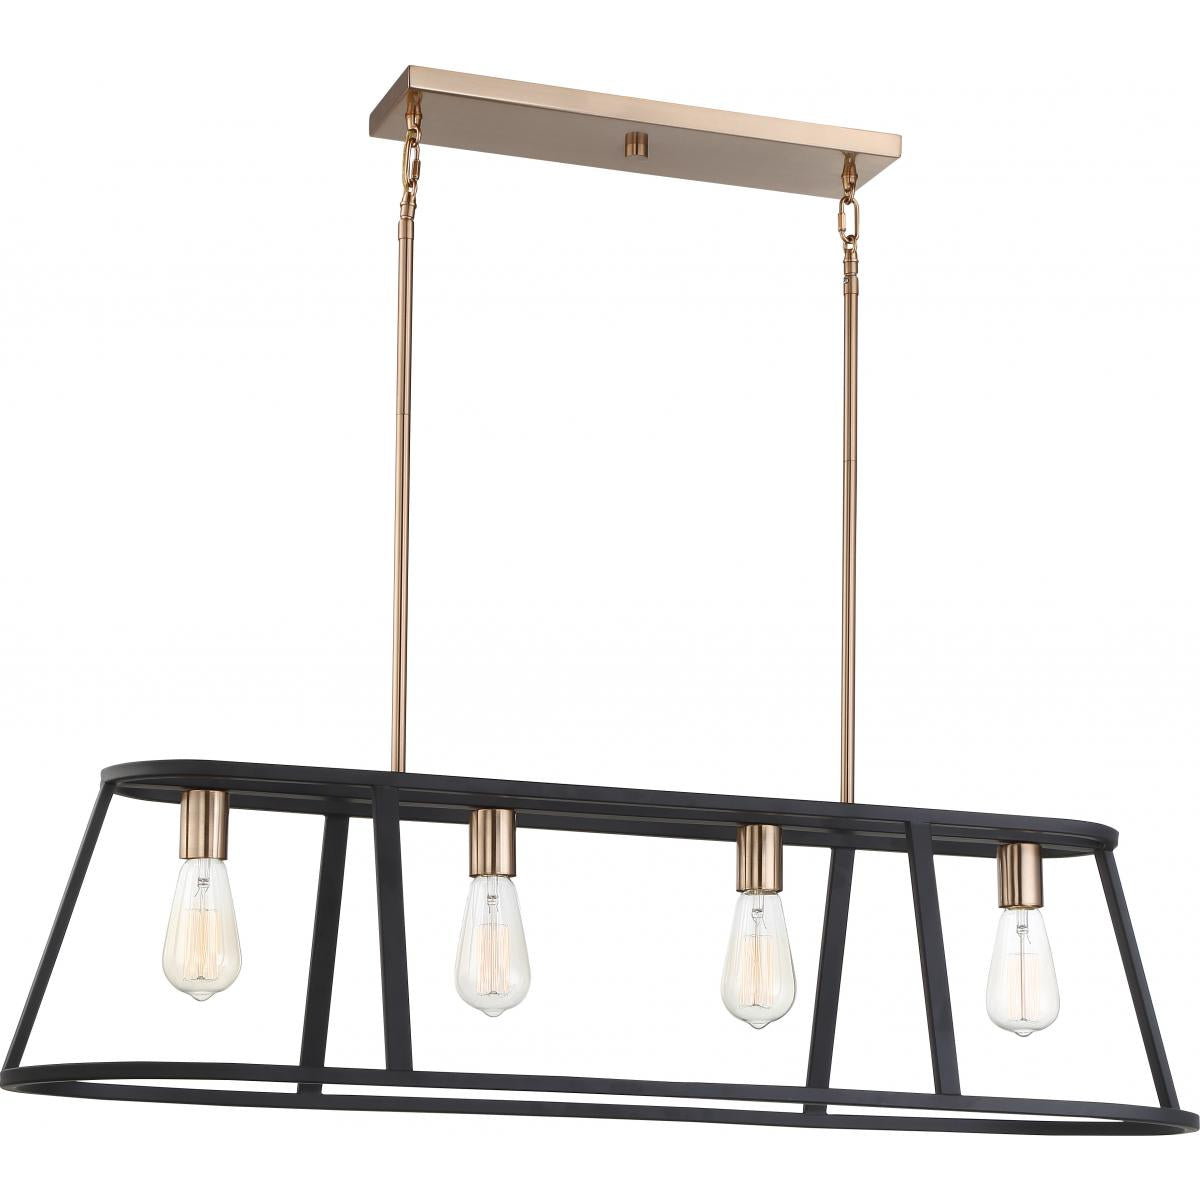 Chassis 40 in. 4 Lights Pendant Light Brass Finish